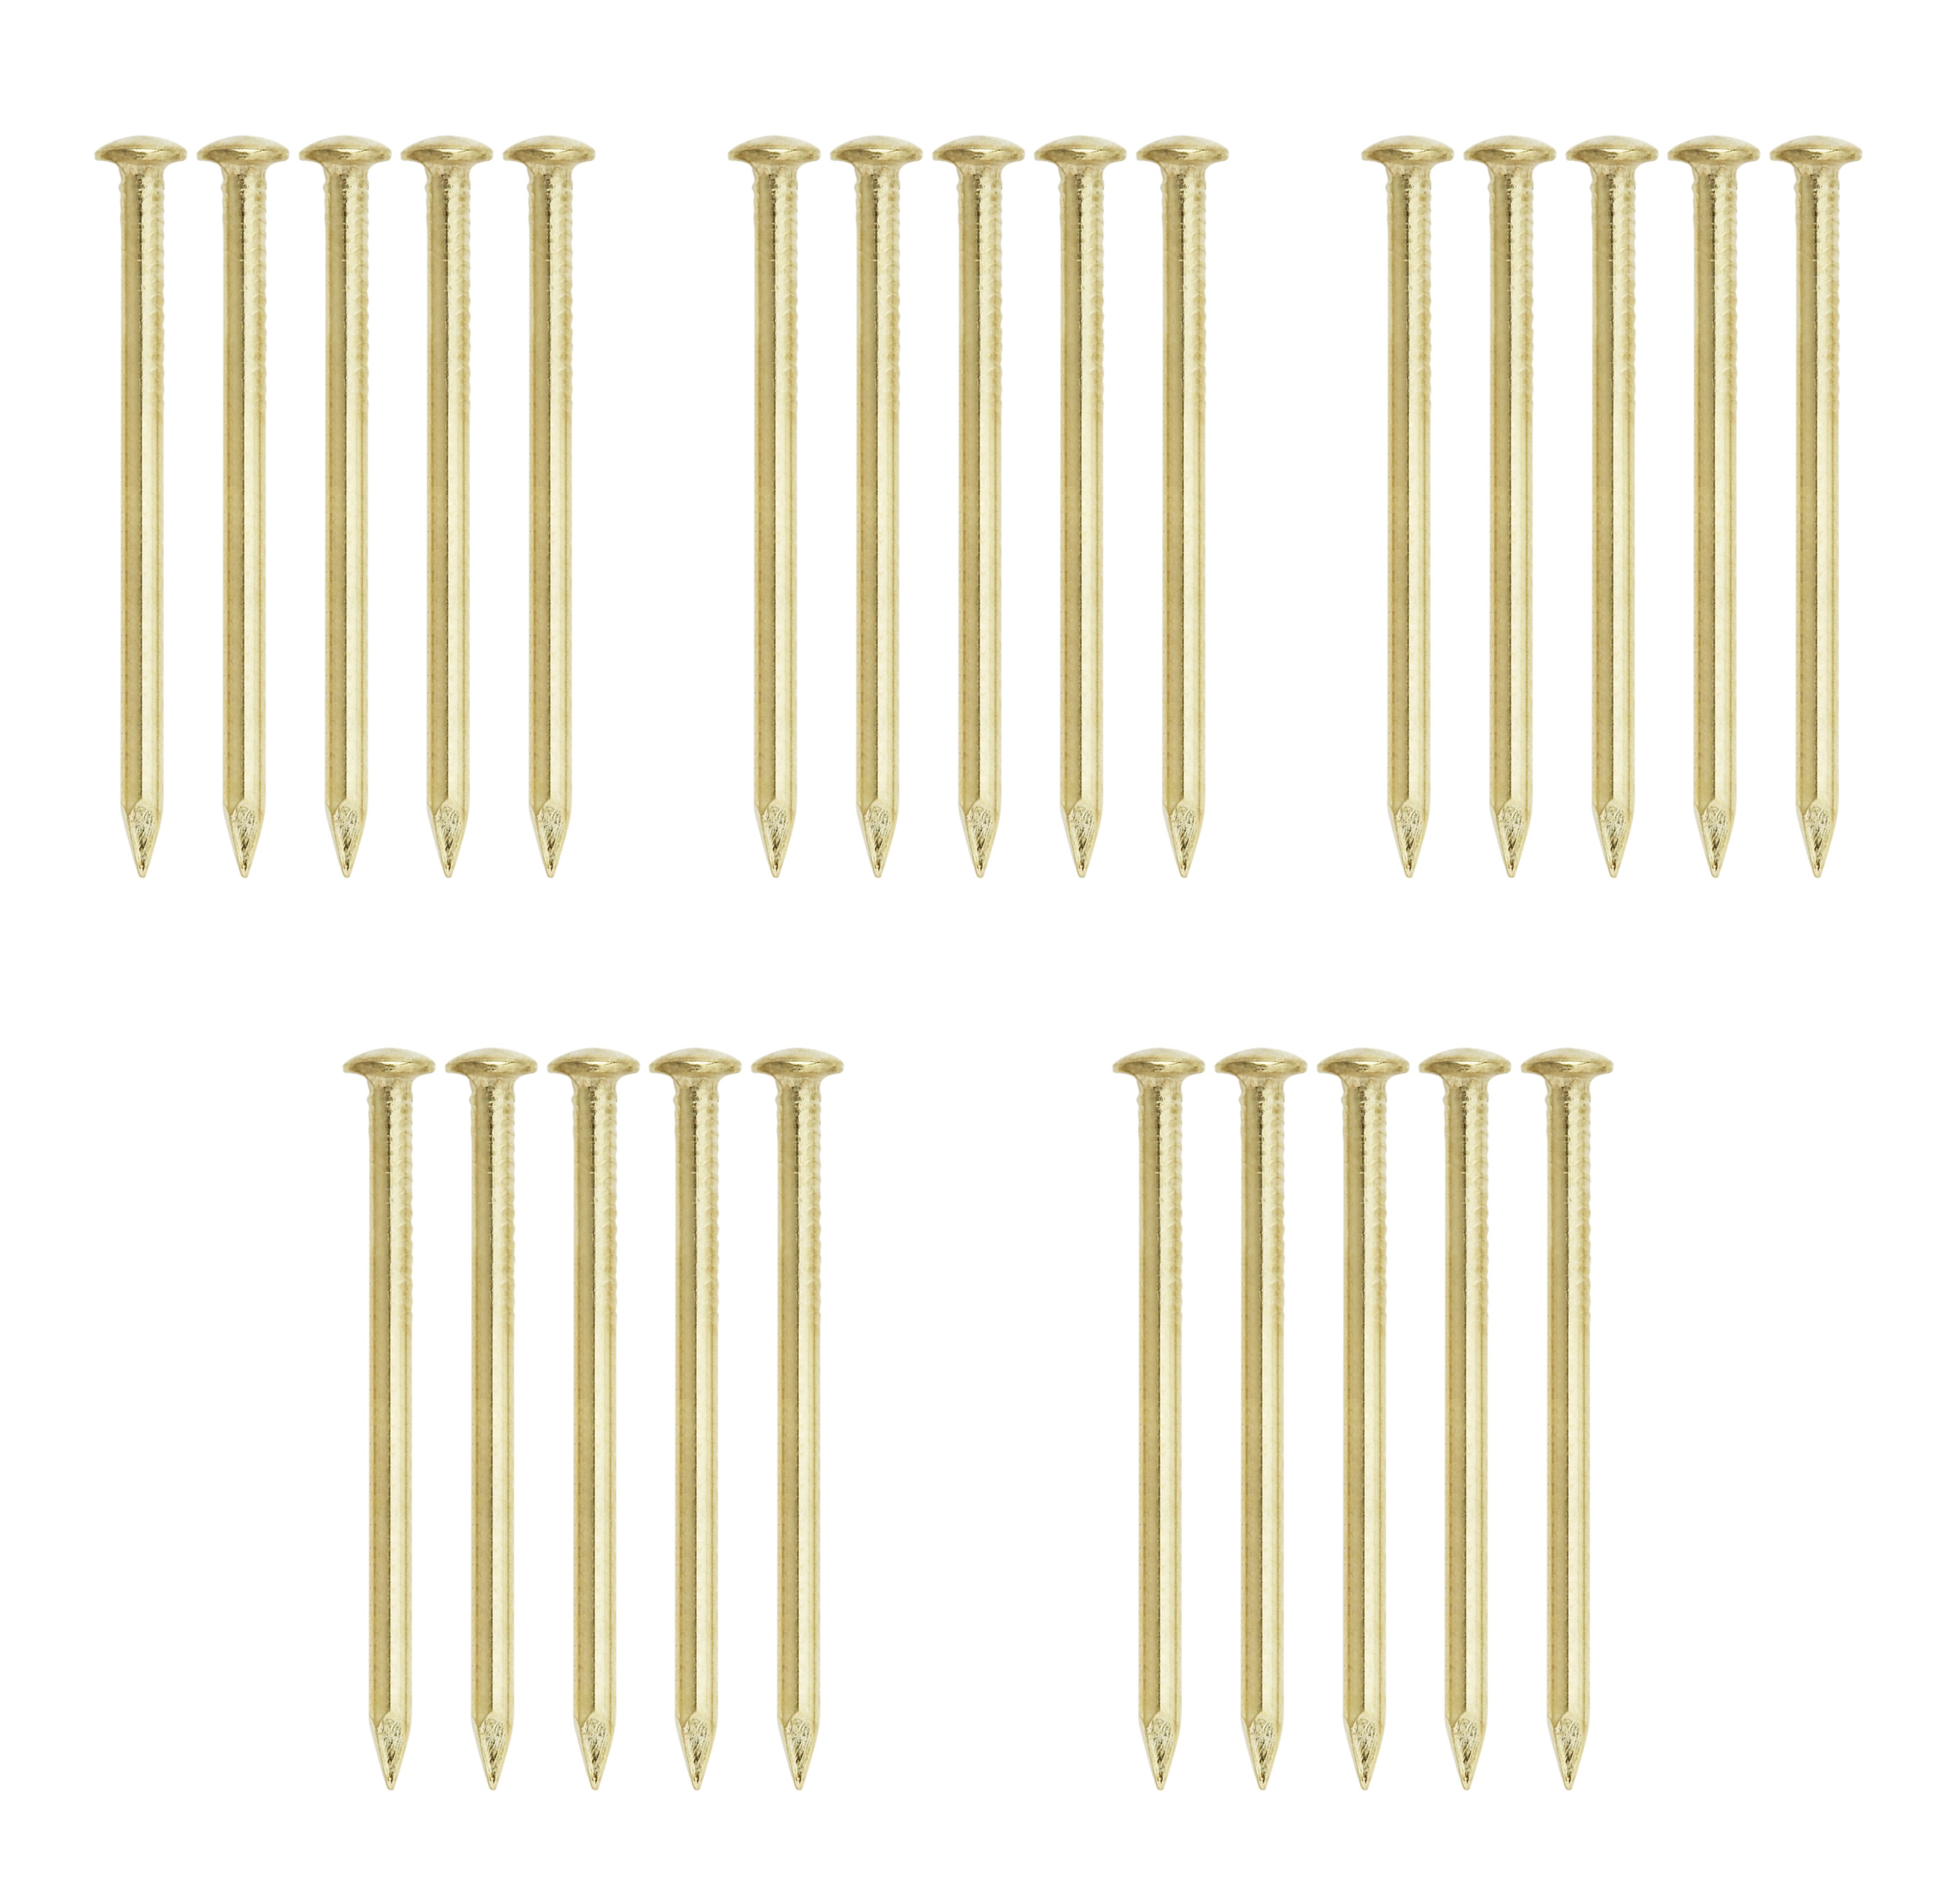 B&Q Picture pin (L)26.5mm (Dia)1.5mm, Pack of 25